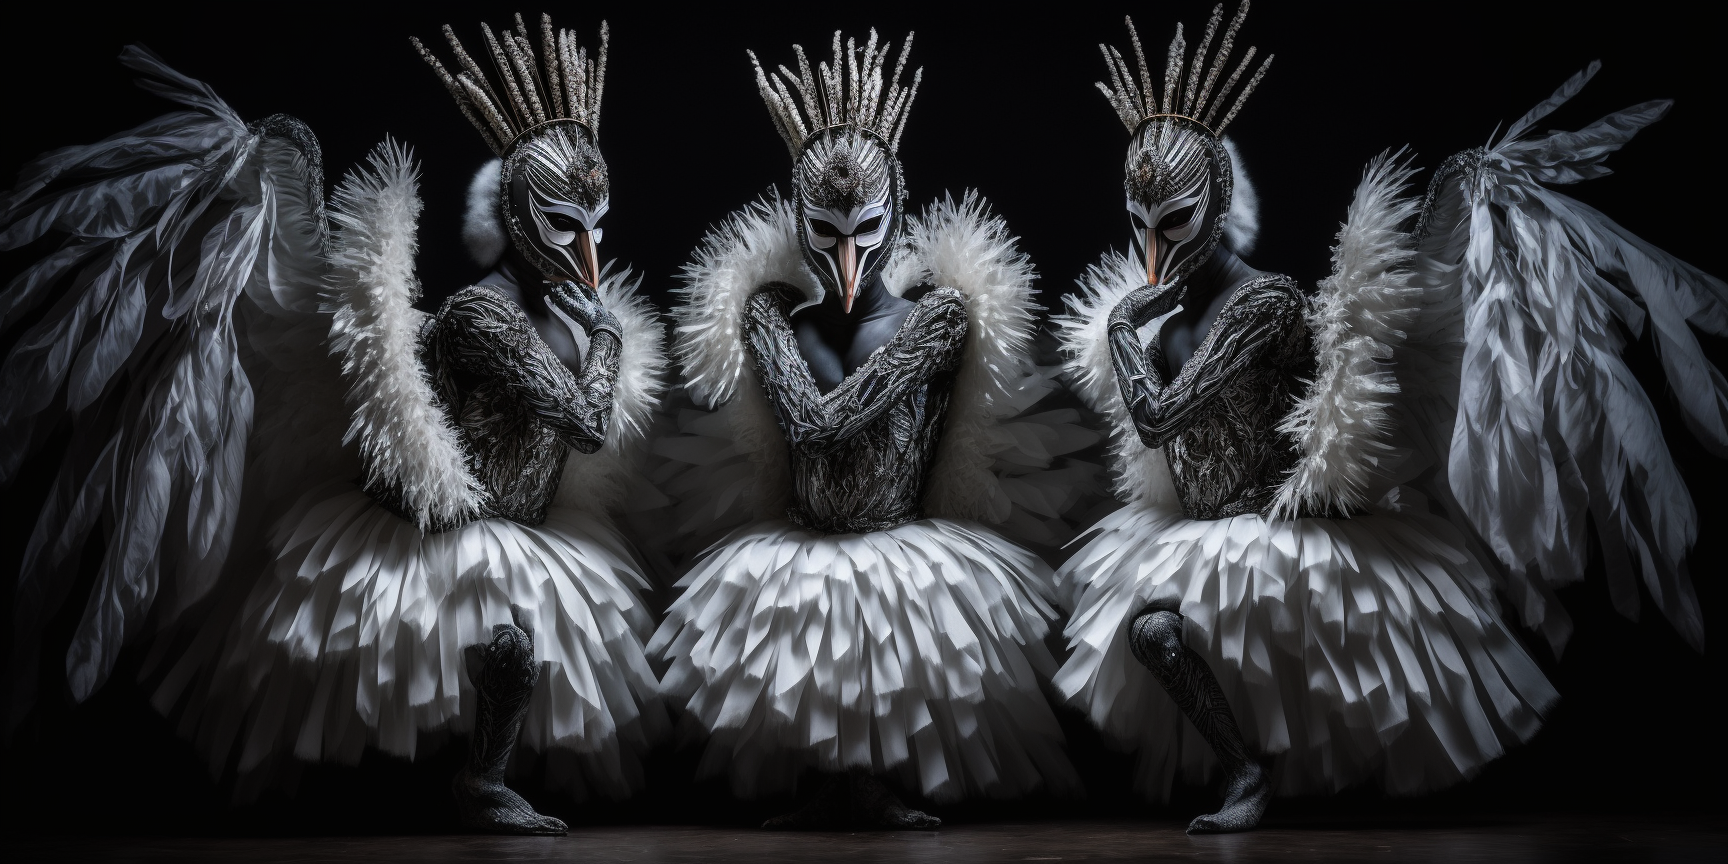 Asia_3_BALET_DANCER_S_in_Swan_Lake_one_BLACK_SWAN_innovative_ex_69fcfd94-ce70-43b6-9964-12d238f9e325.png